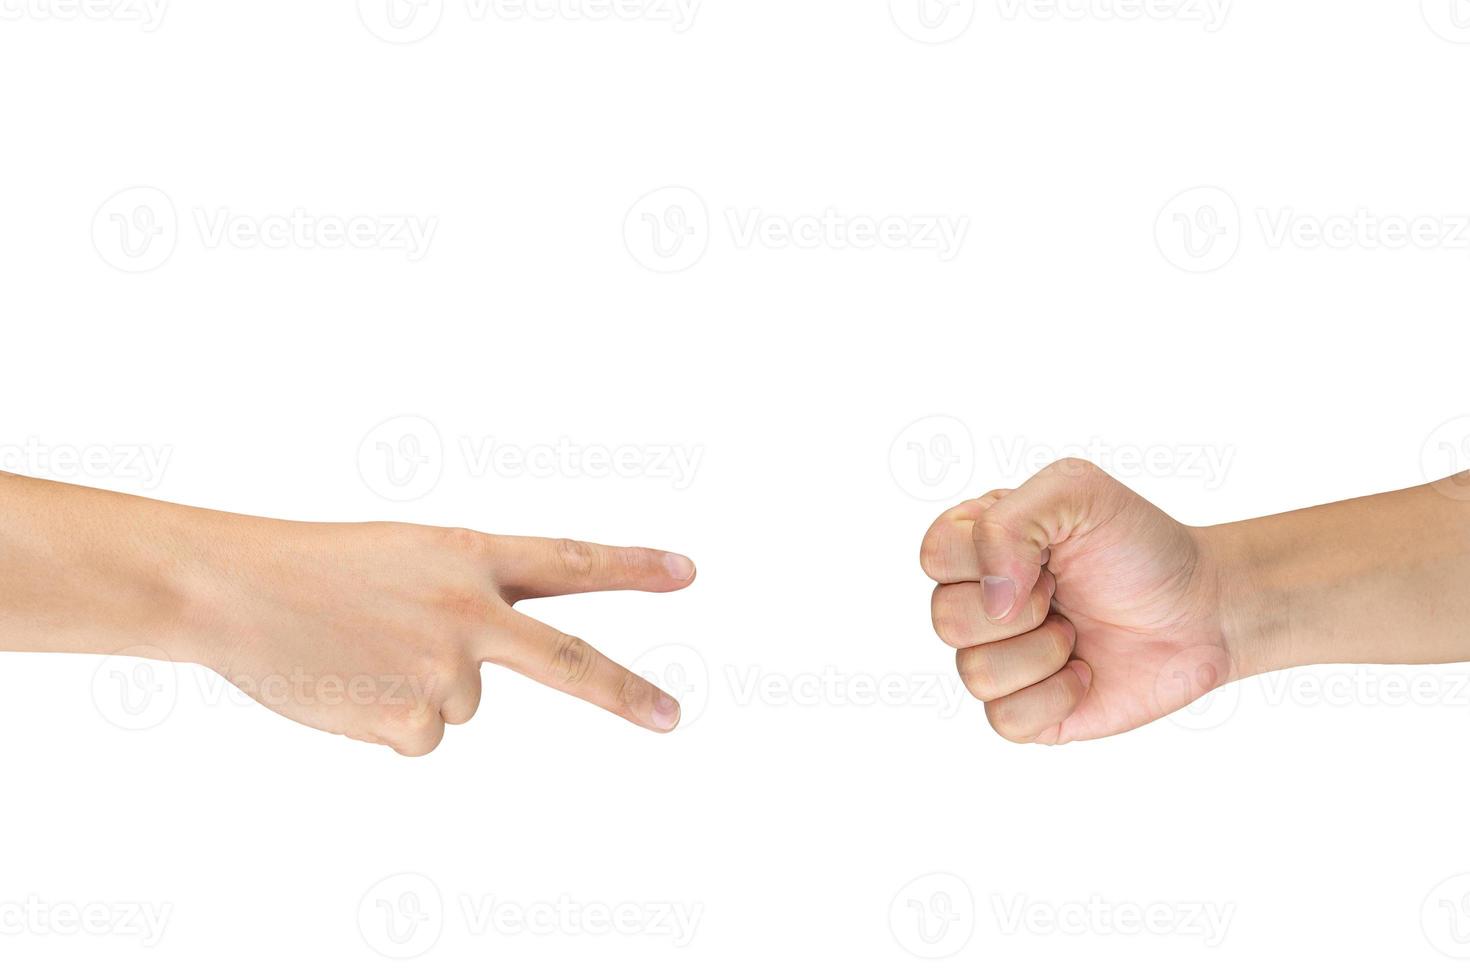 Rock Paper Scissors gambling hand game for all of ages and sex. This is Asian male hands post on white background. photo